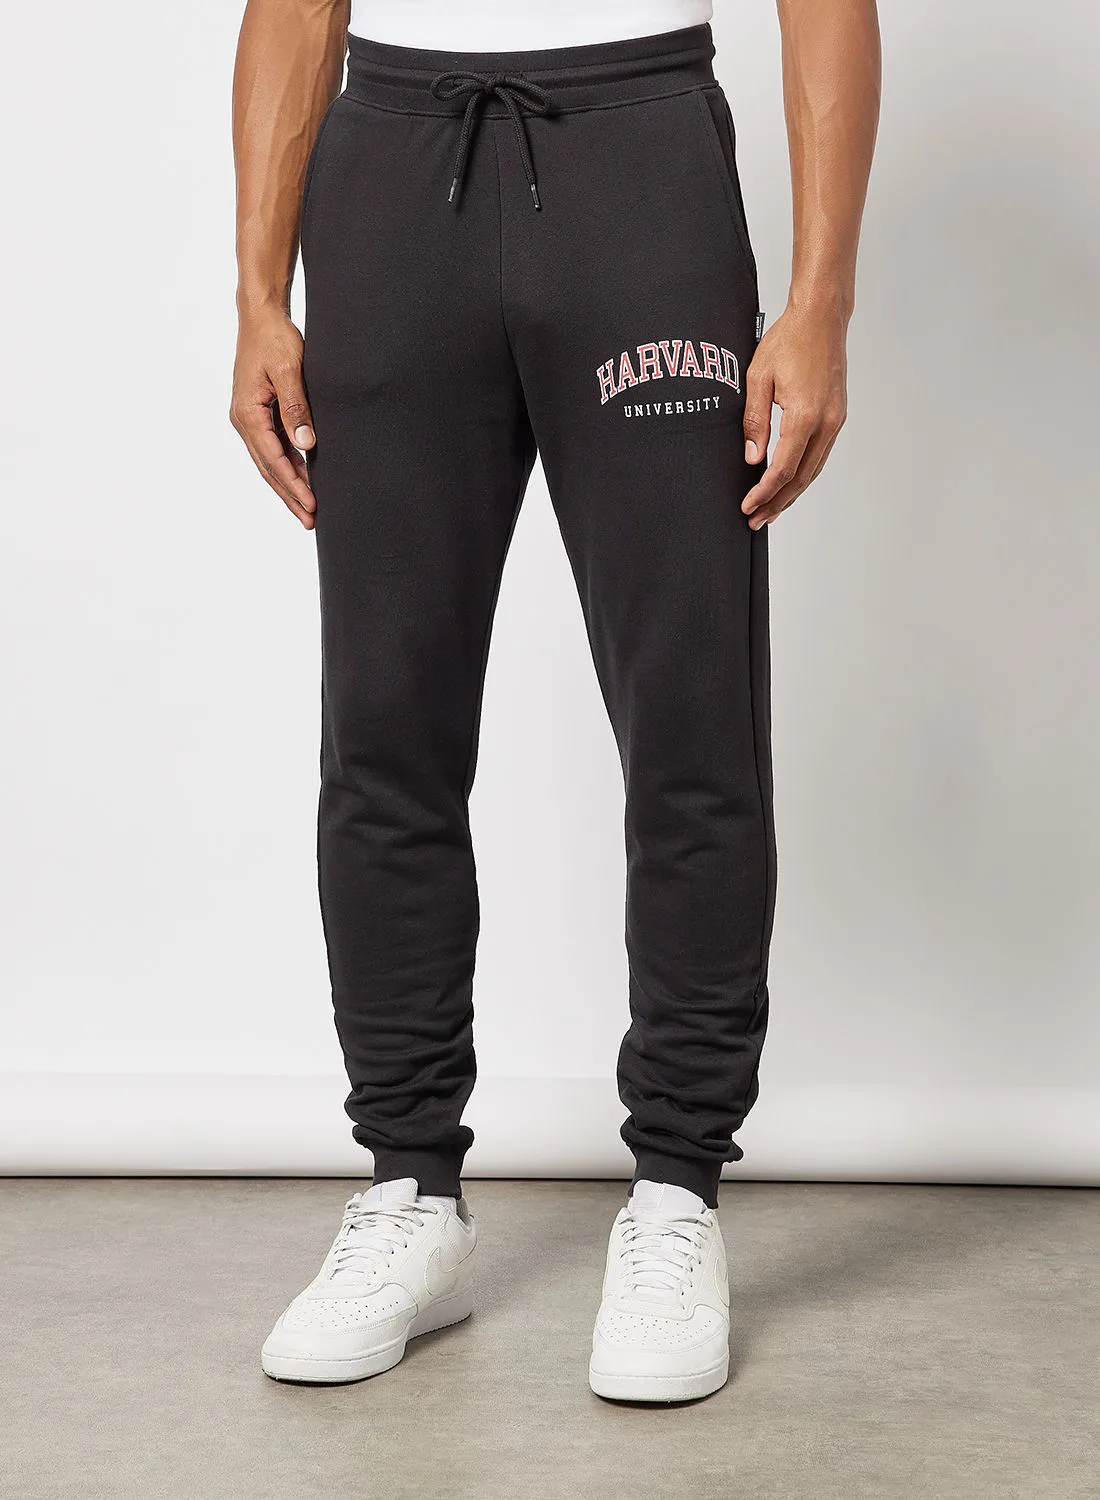 ONLY & SONS Harvard Sweatpants